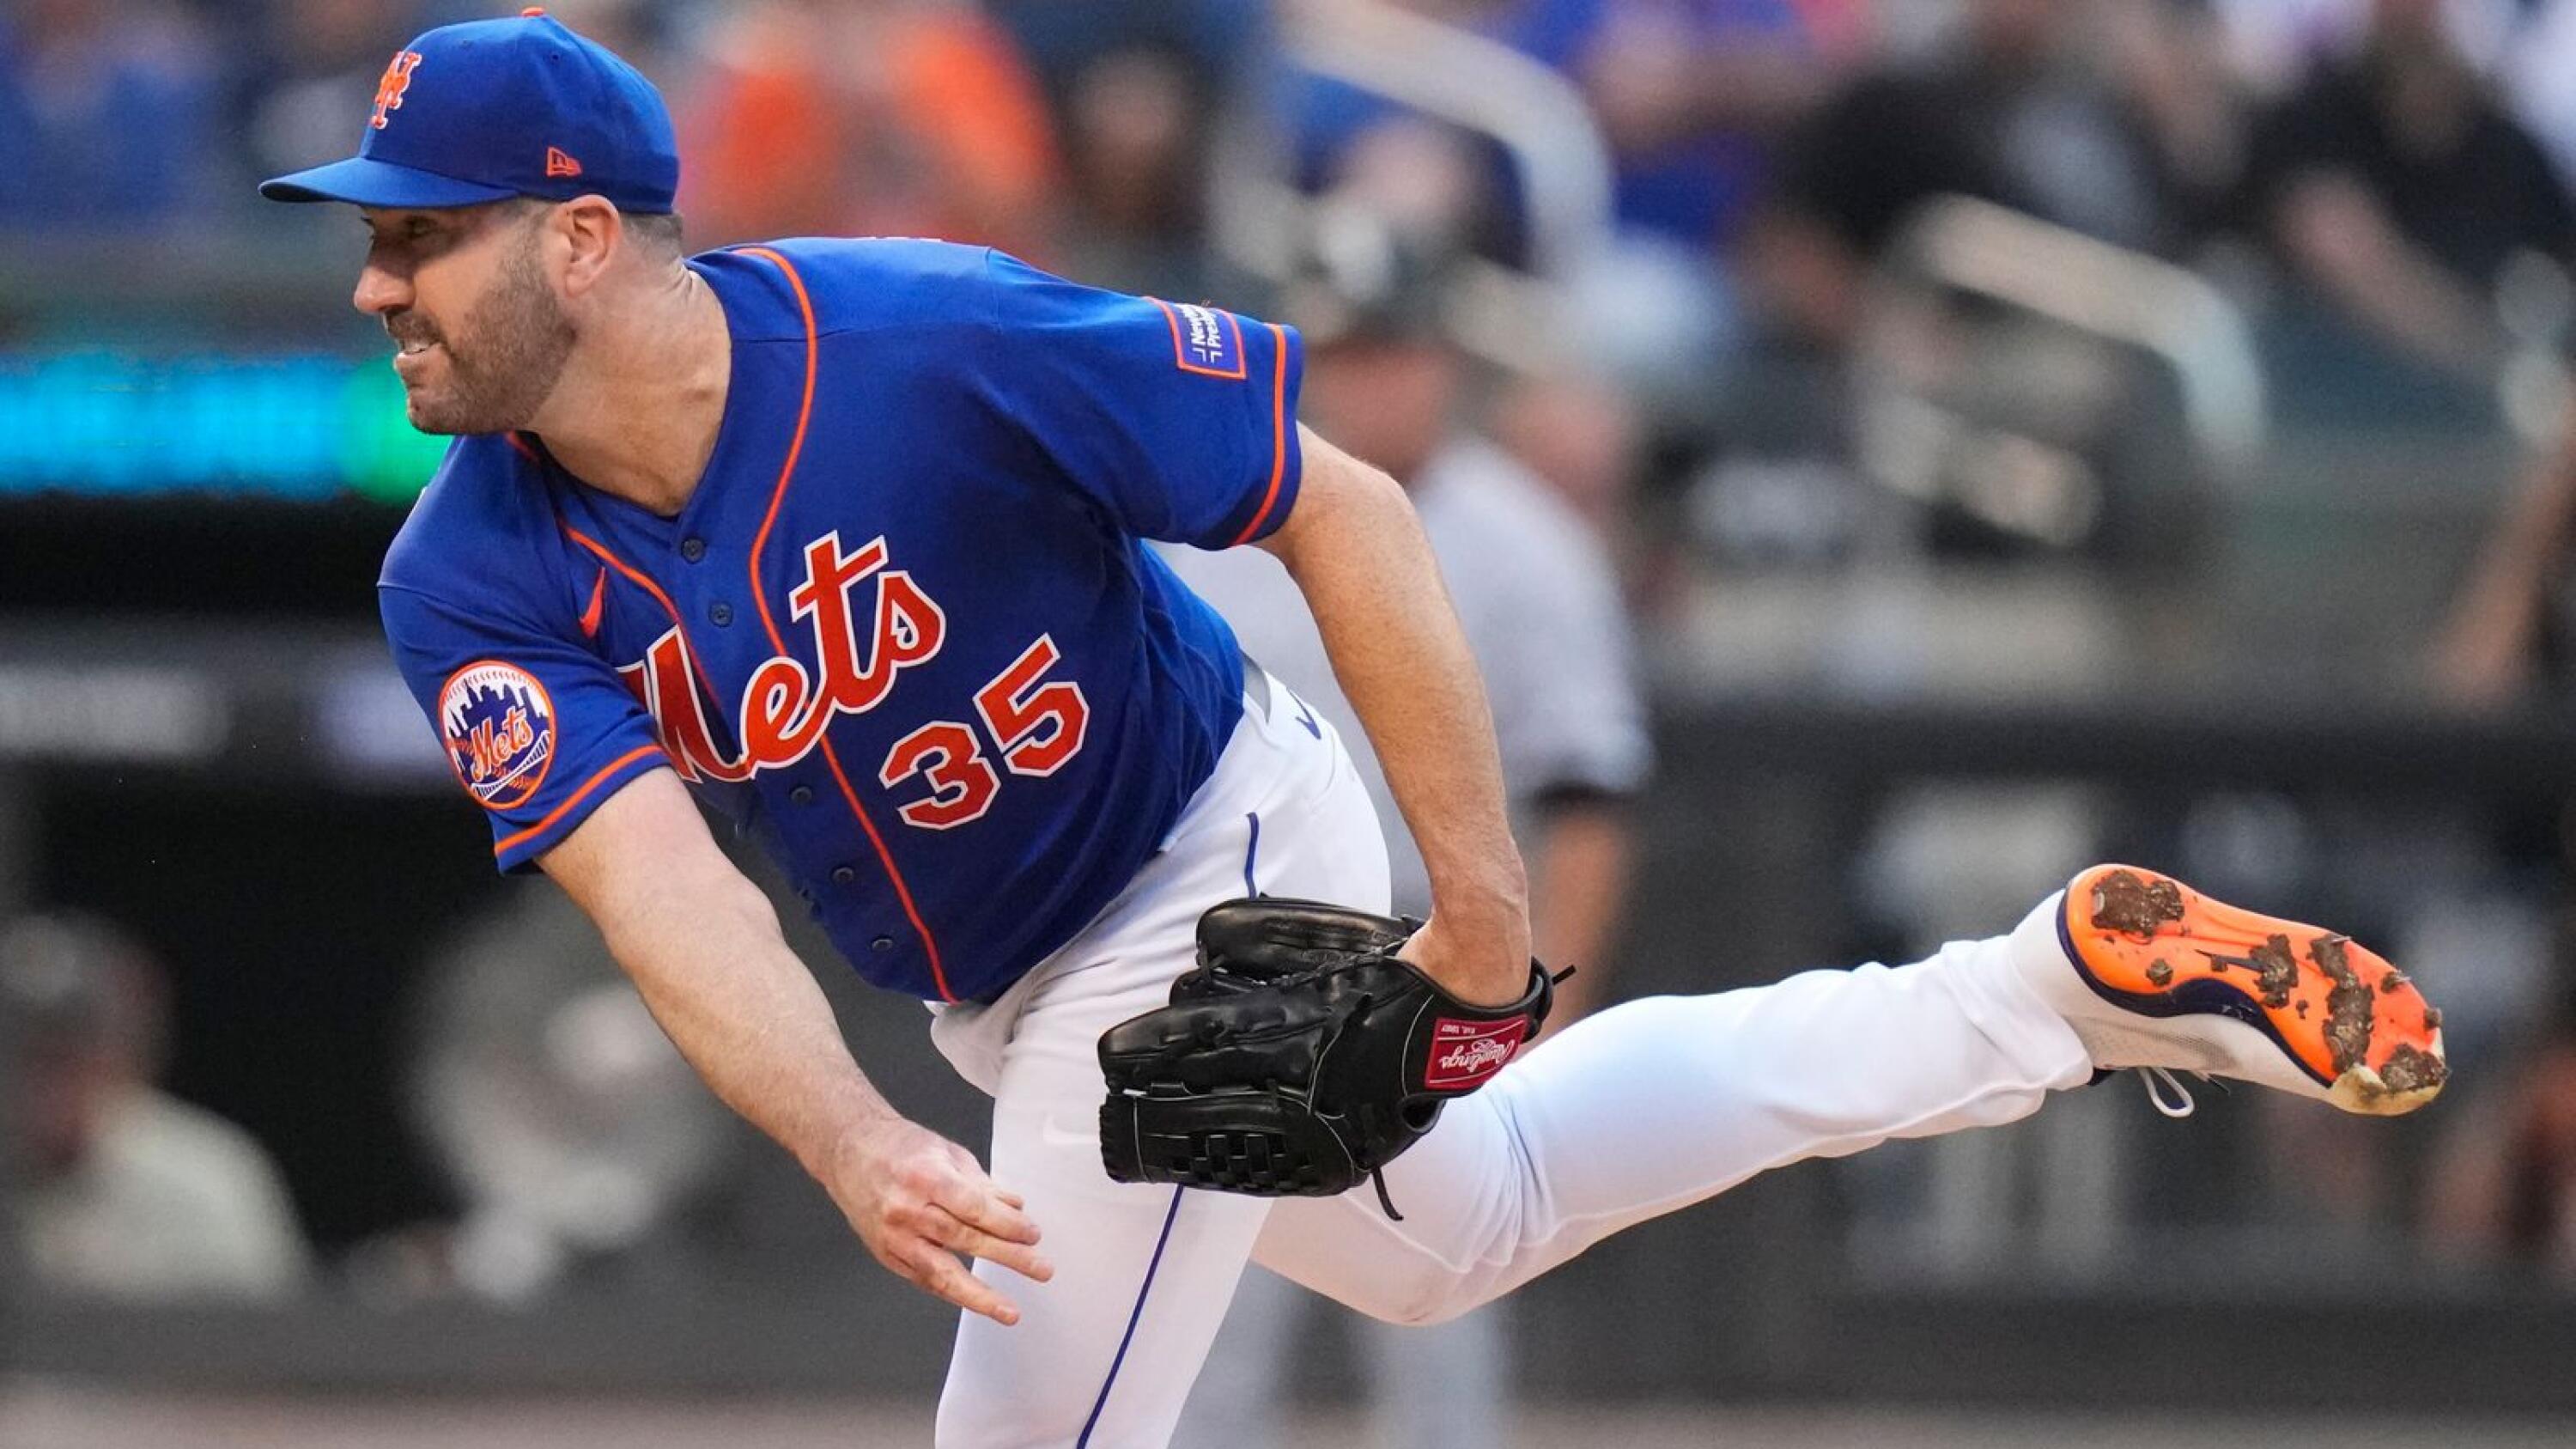 Verlander goes 8 innings to lead the Mets by White Sox 5-1